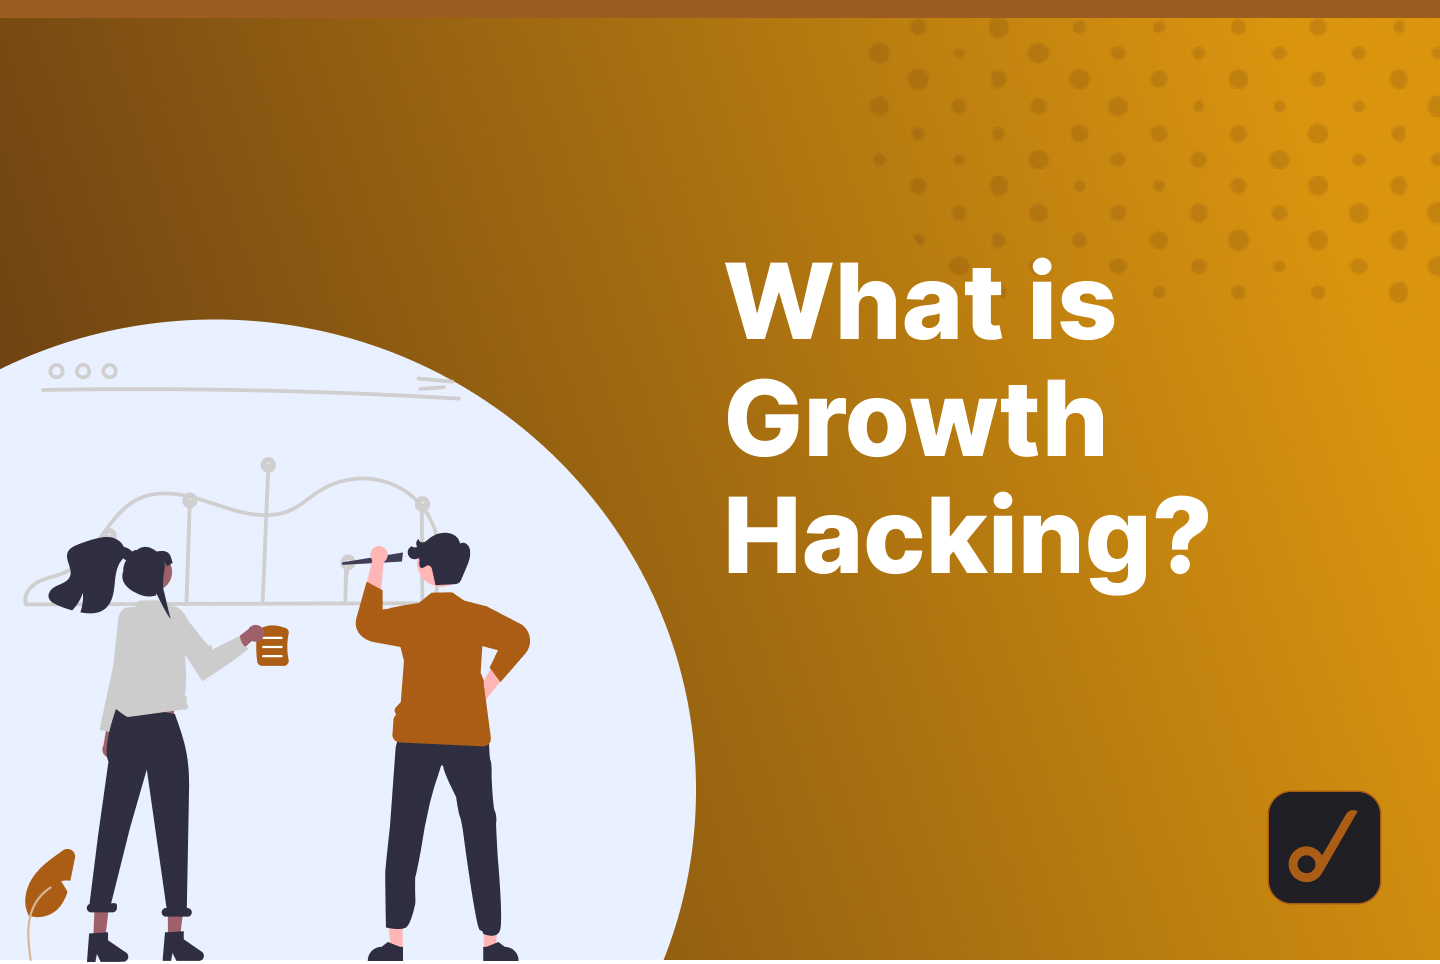 What is Growth Hacking? Using Data to Increase the Growth of a Business